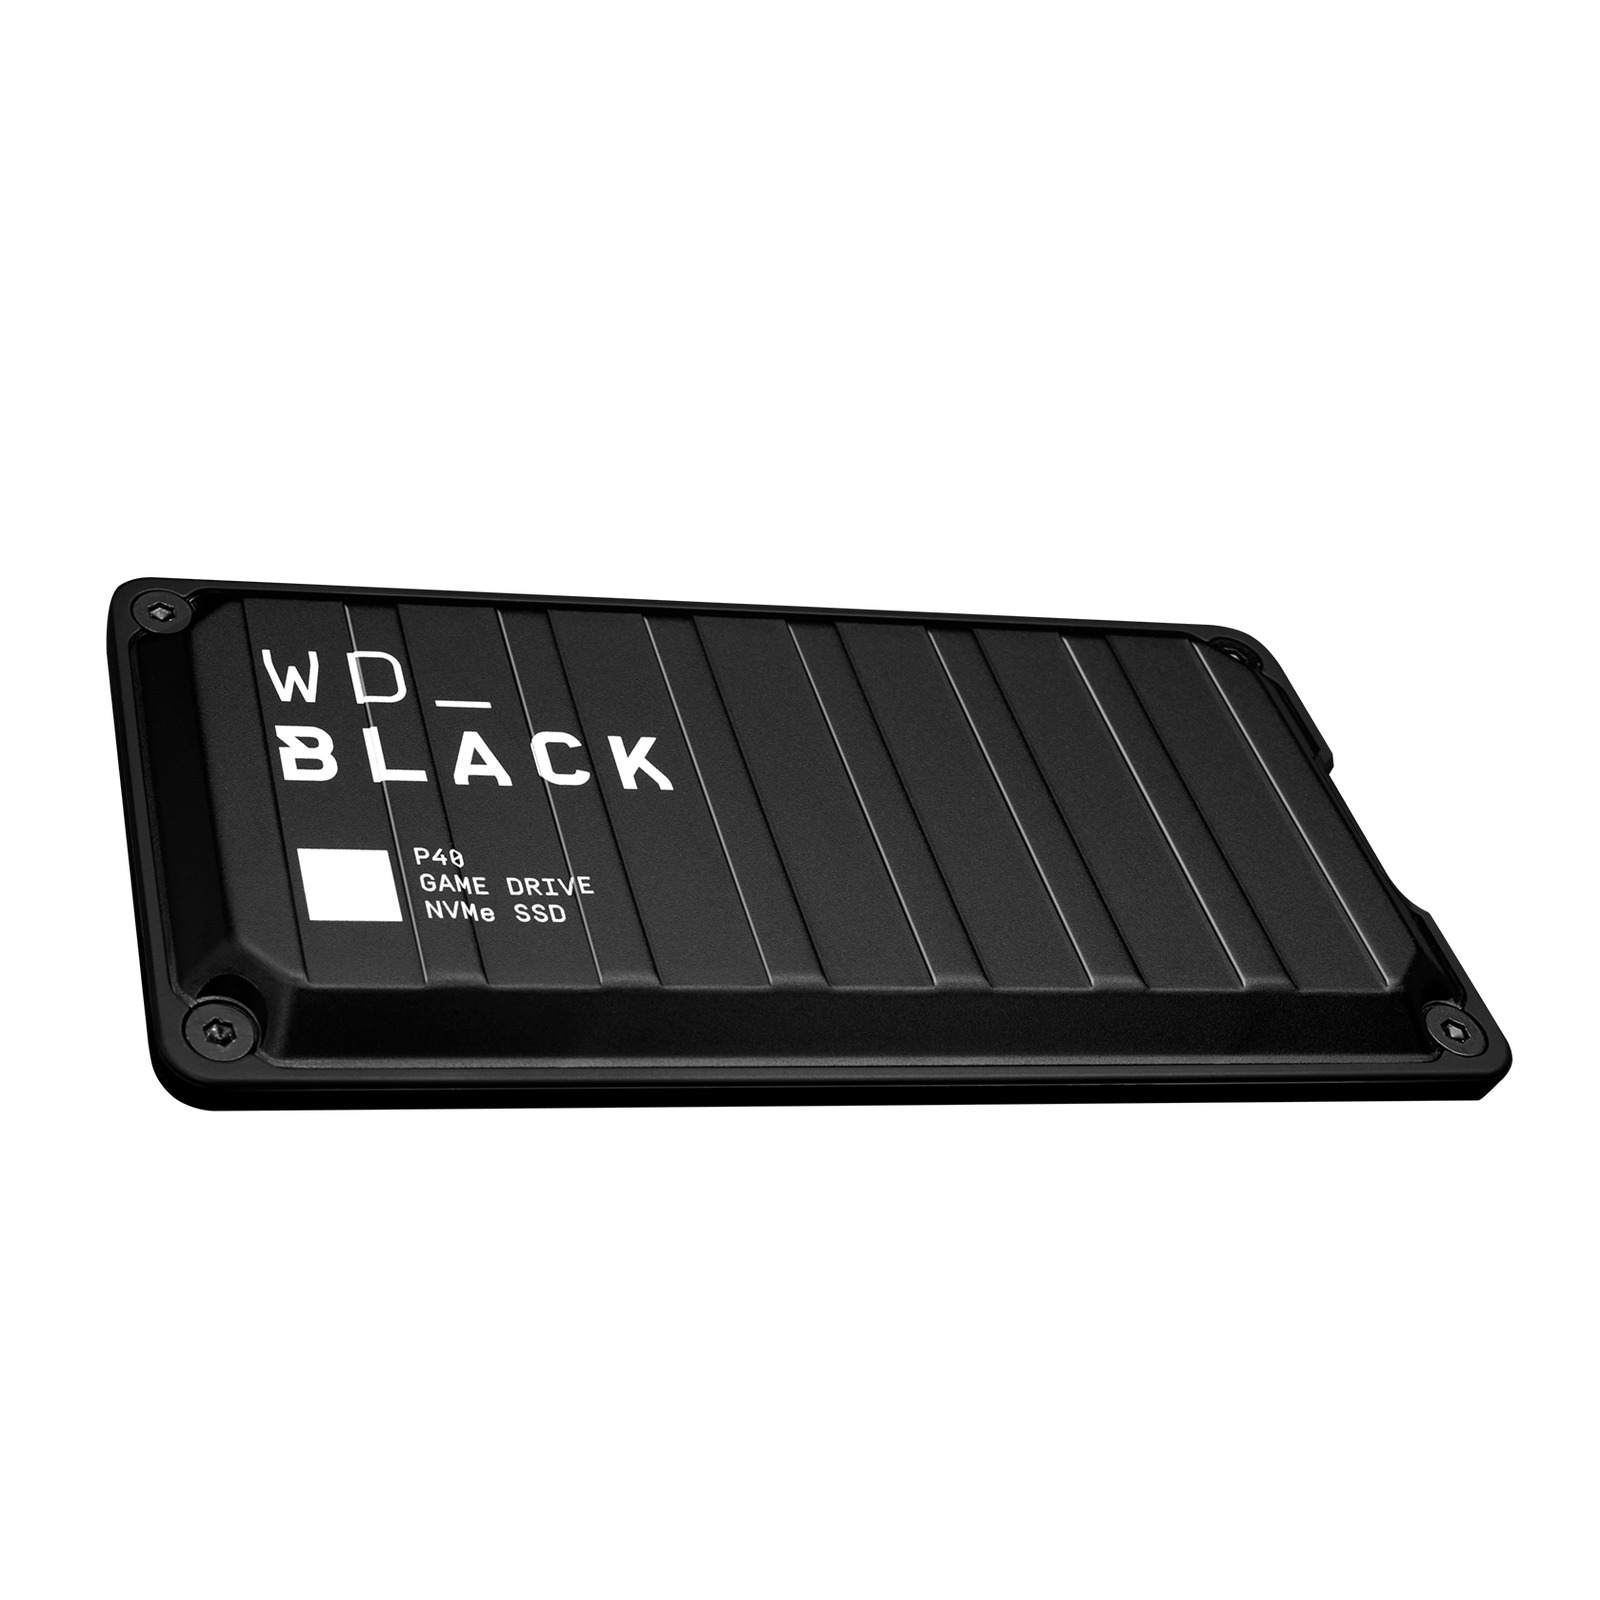 WD_BLACK 2TB P40 Game Drive SSD, External Solid State Drive - WDBAWY0020BBK-WESN